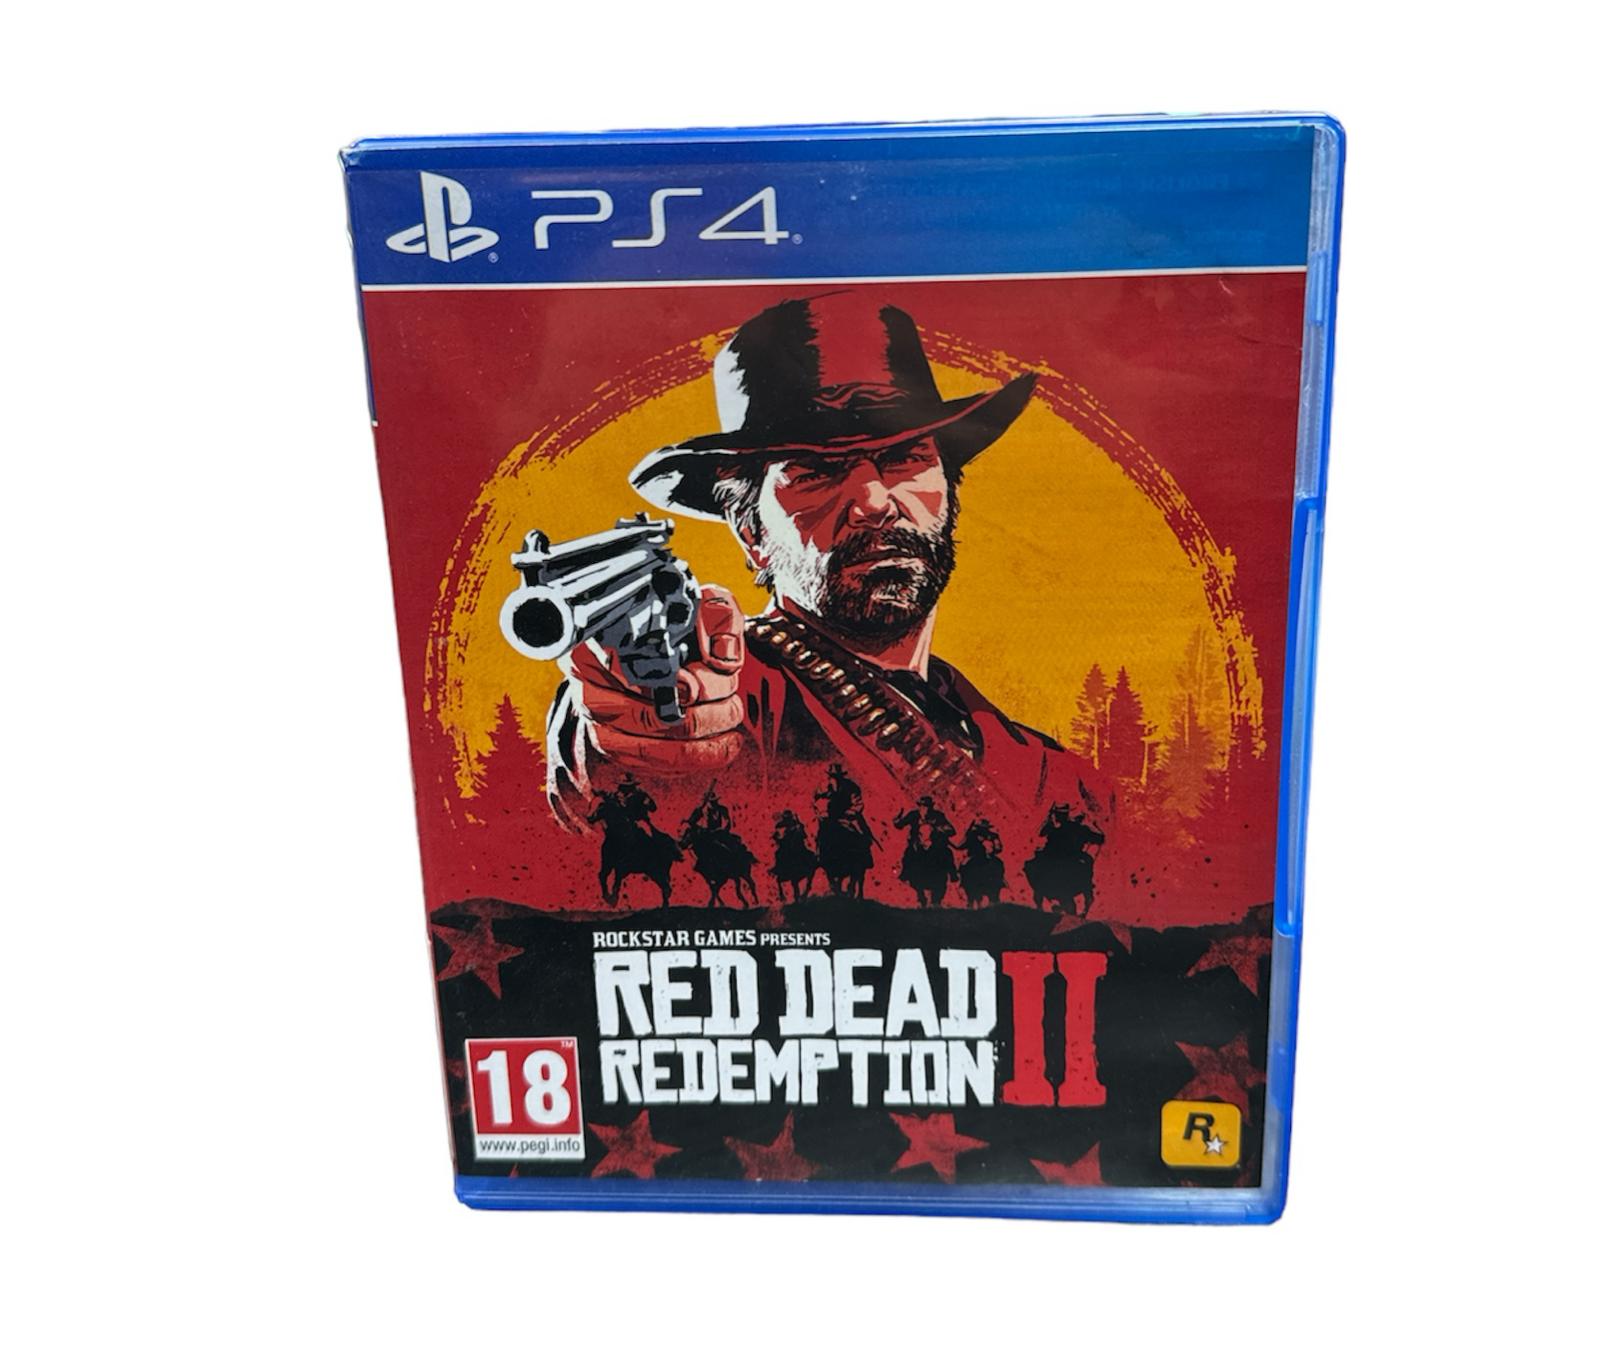 Red Dead Redemption 2 Ps4 With 2 Discs